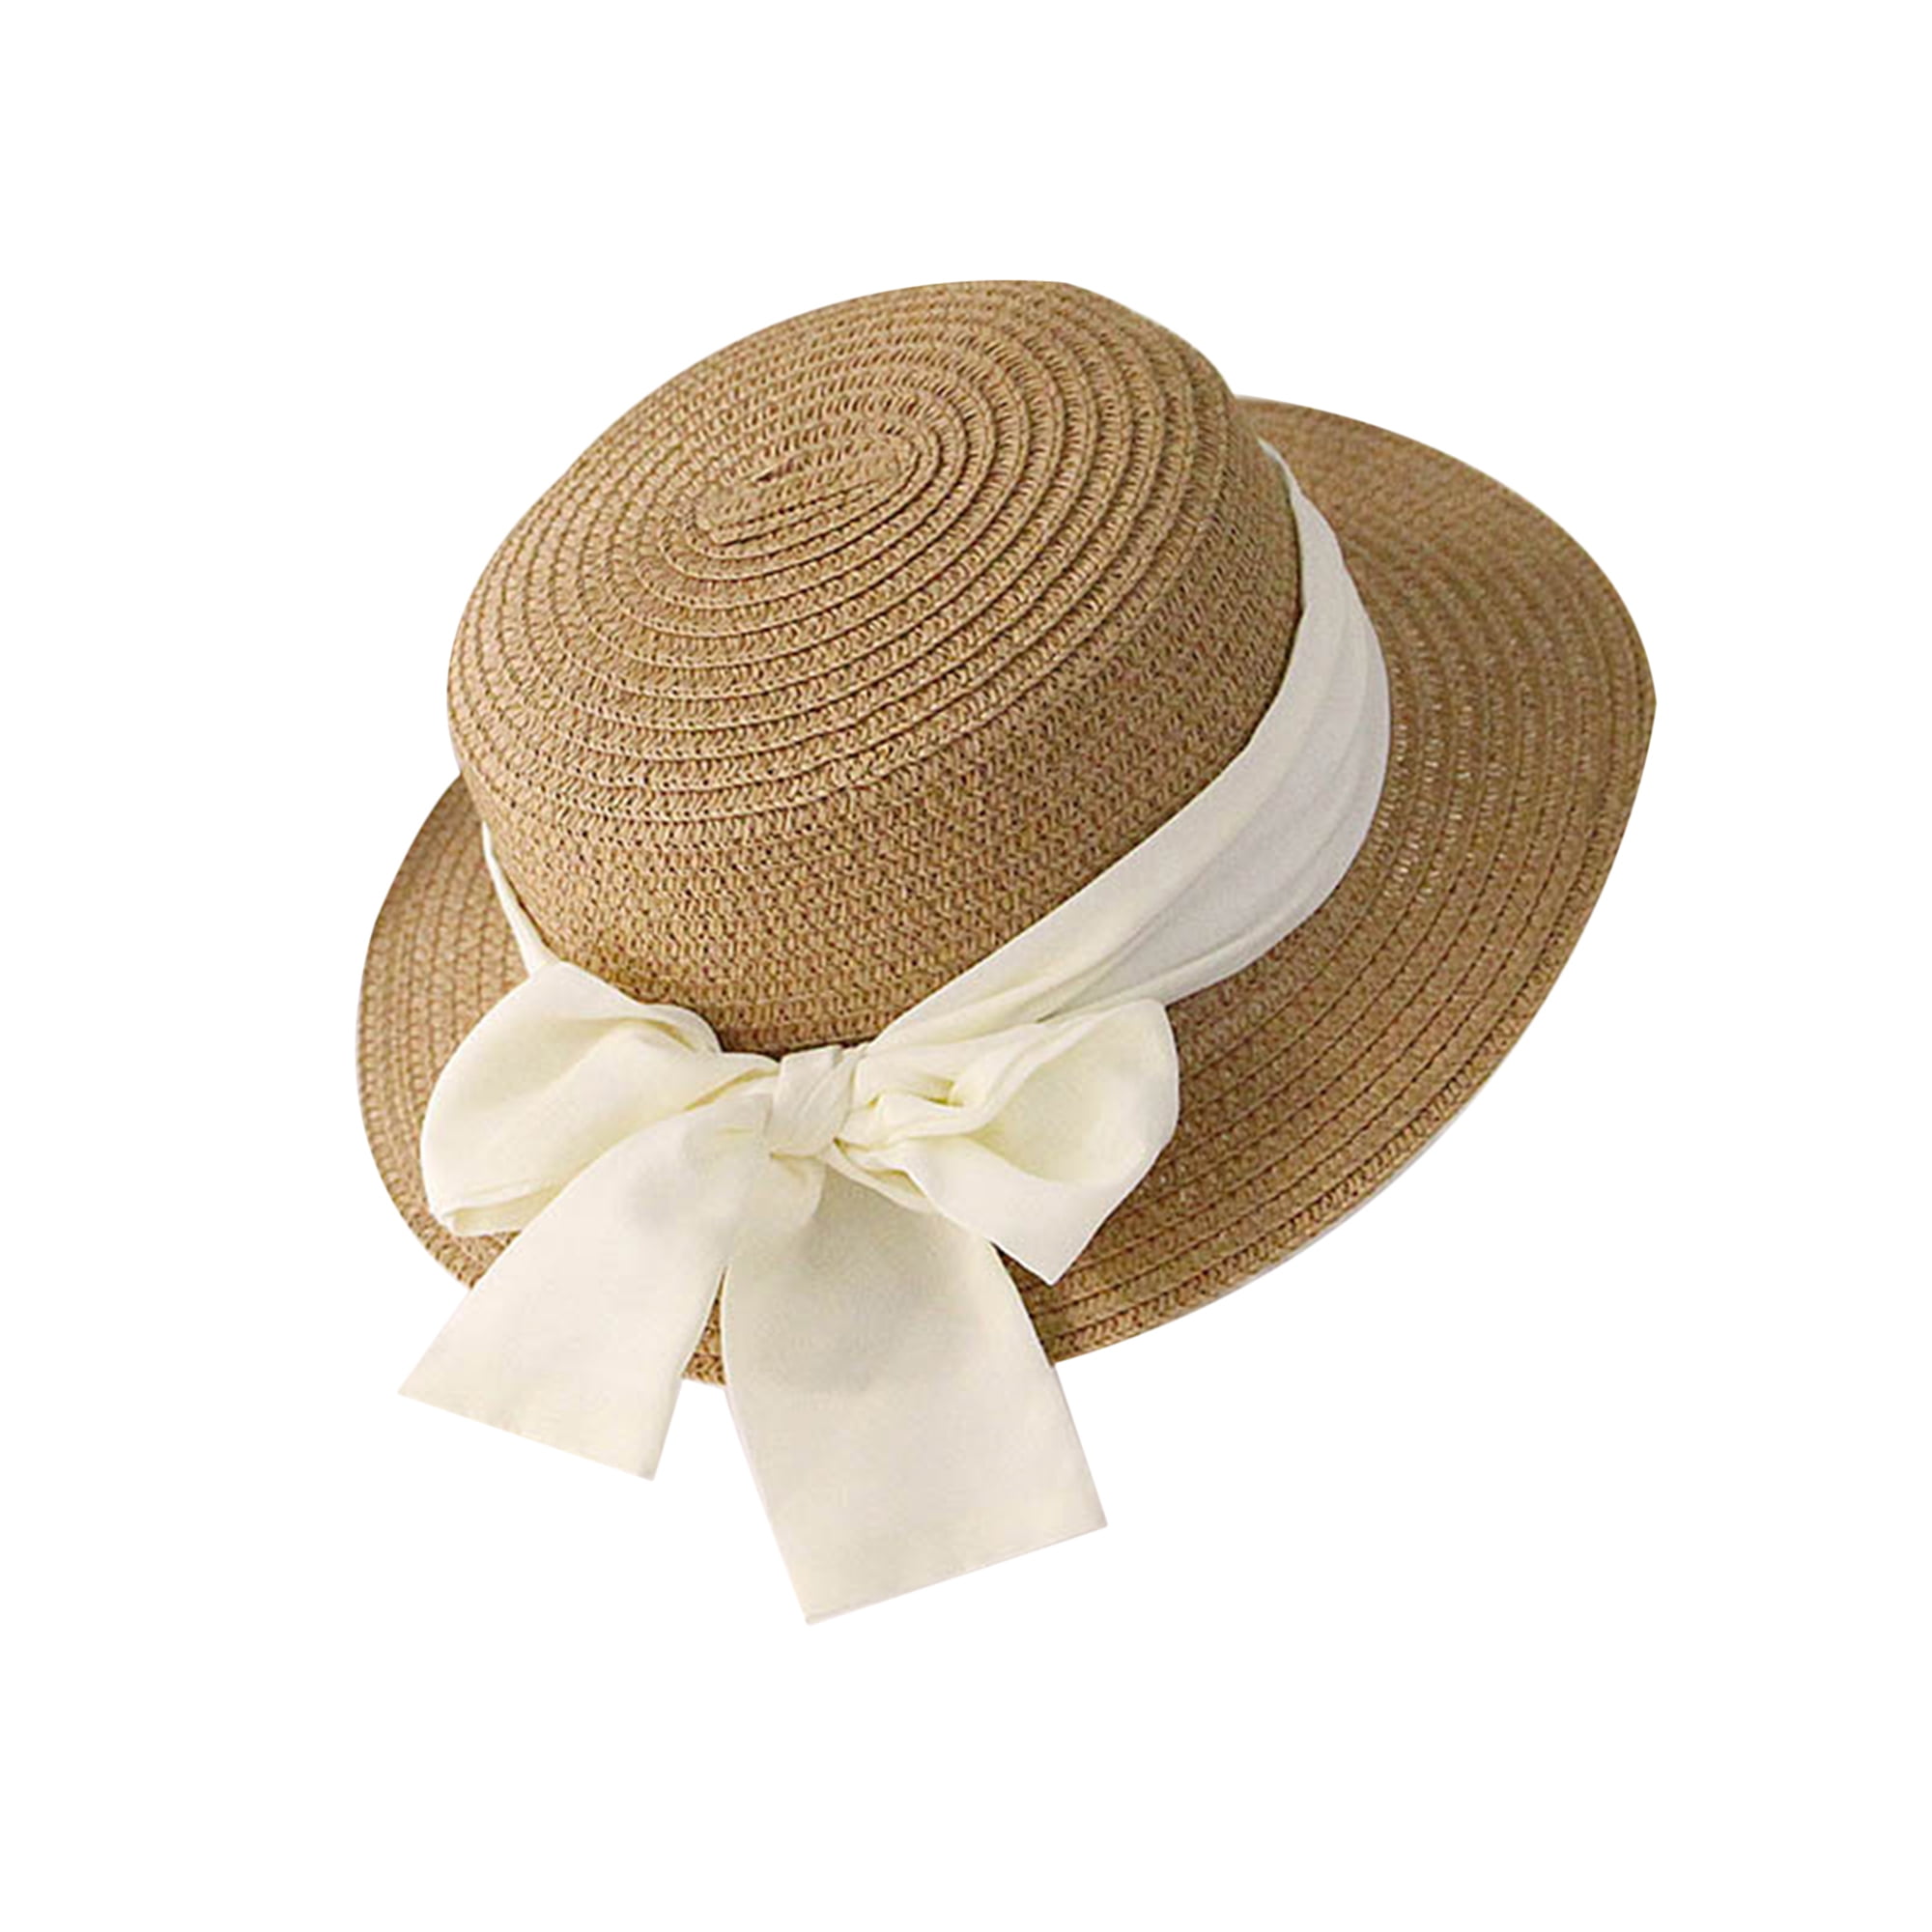 Infants  Girls Straw Hat Outdoor Sunscreen Beach Cap Sun Hat For Age 2-7 Year 